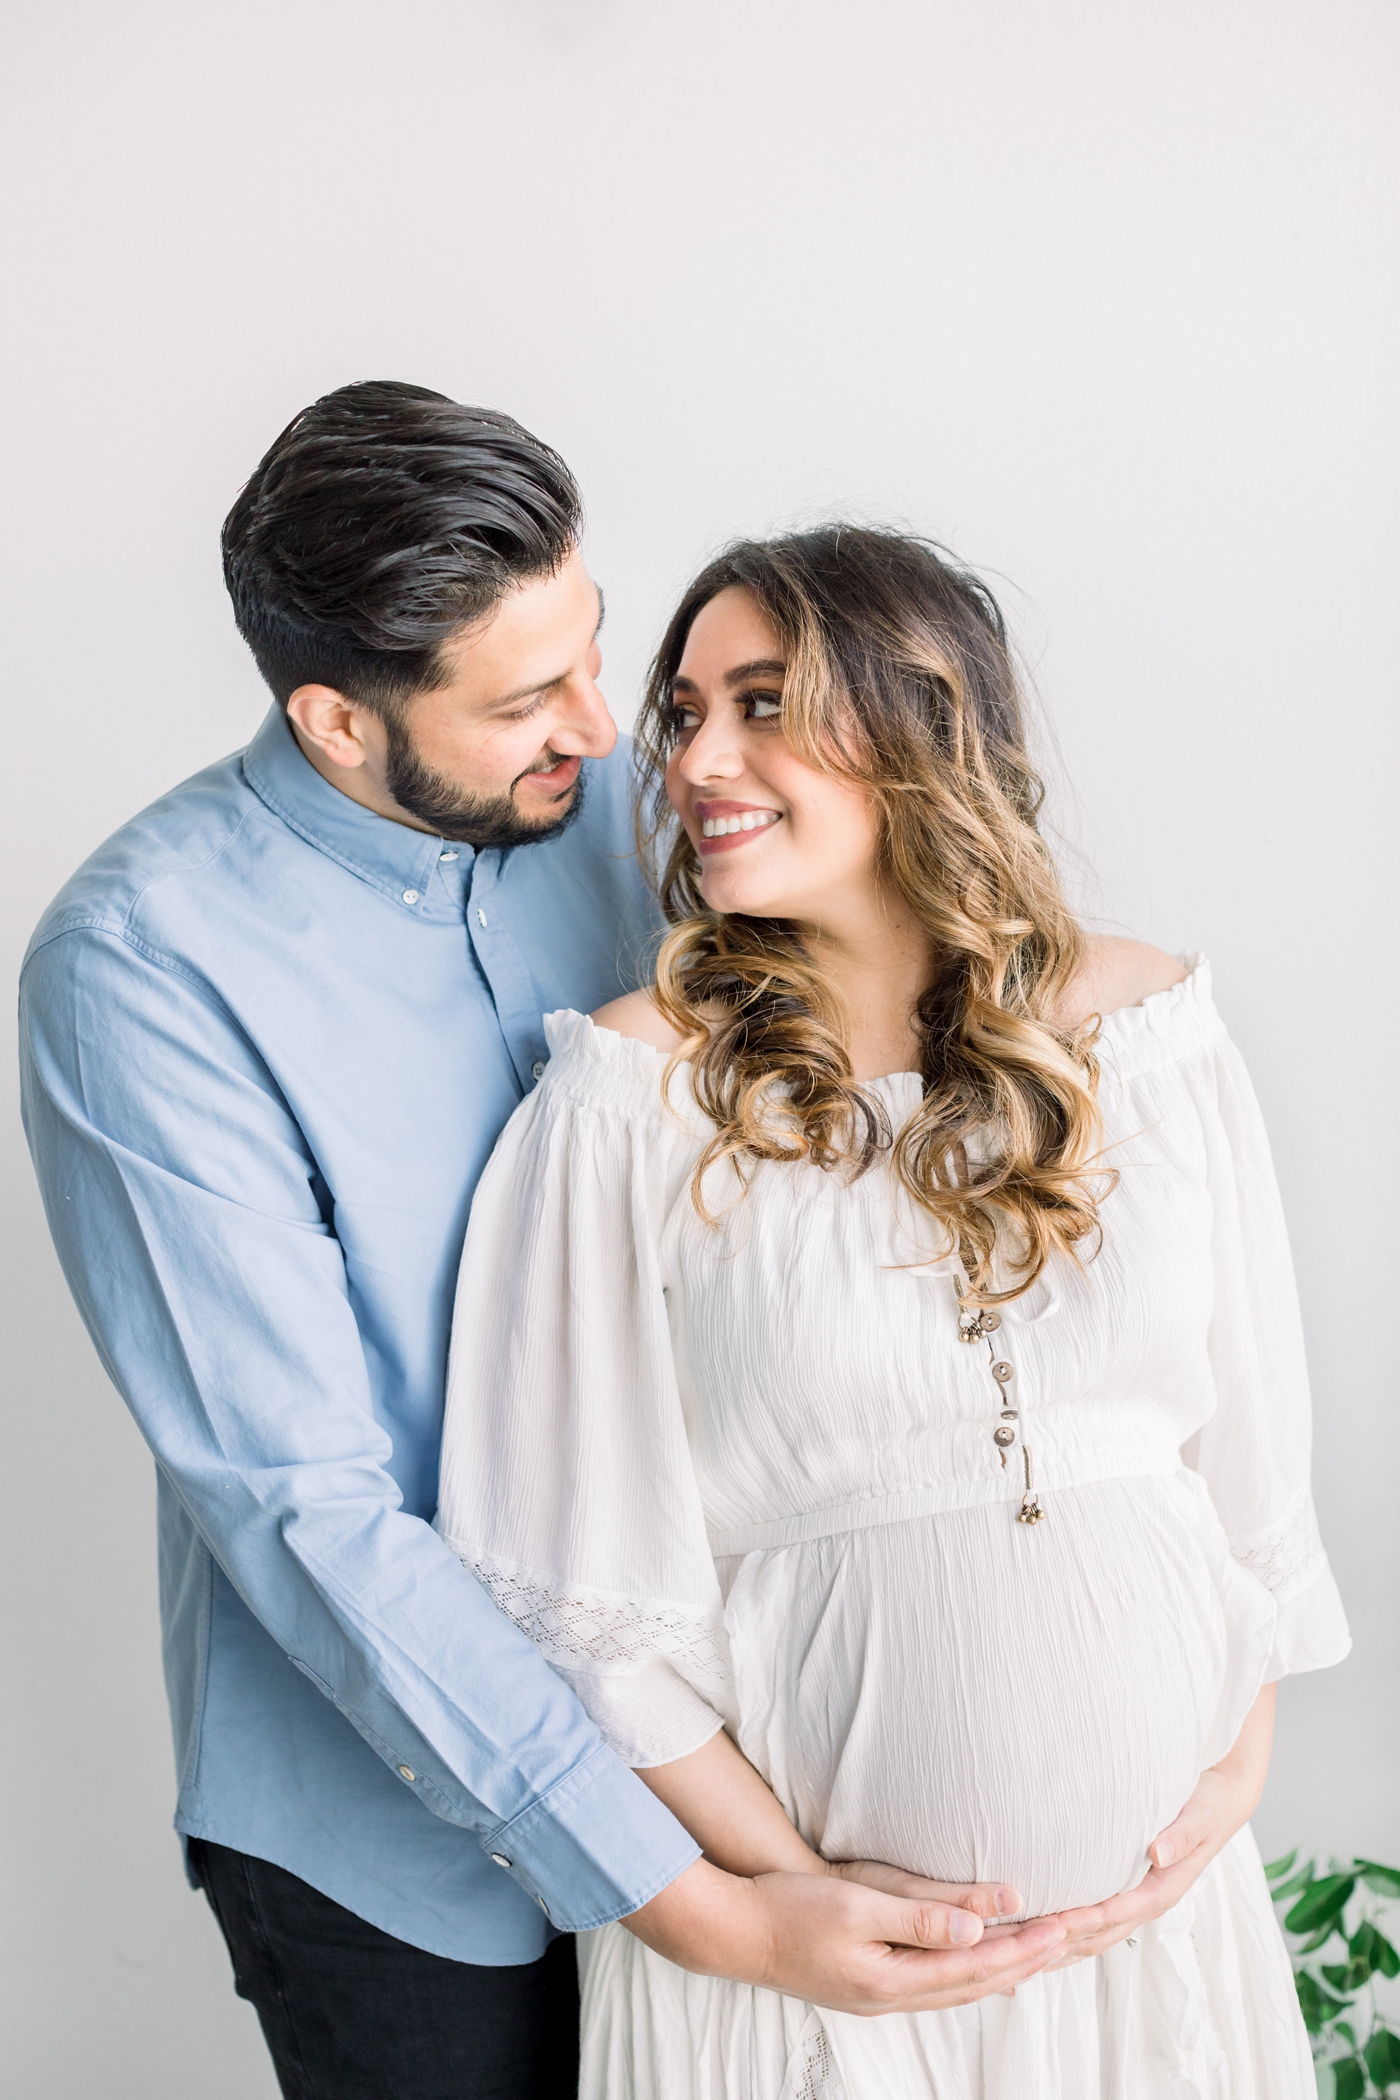 Mom and Dad smiling at each other in studio maternity session. Photo by Sana Ahmed Photography.